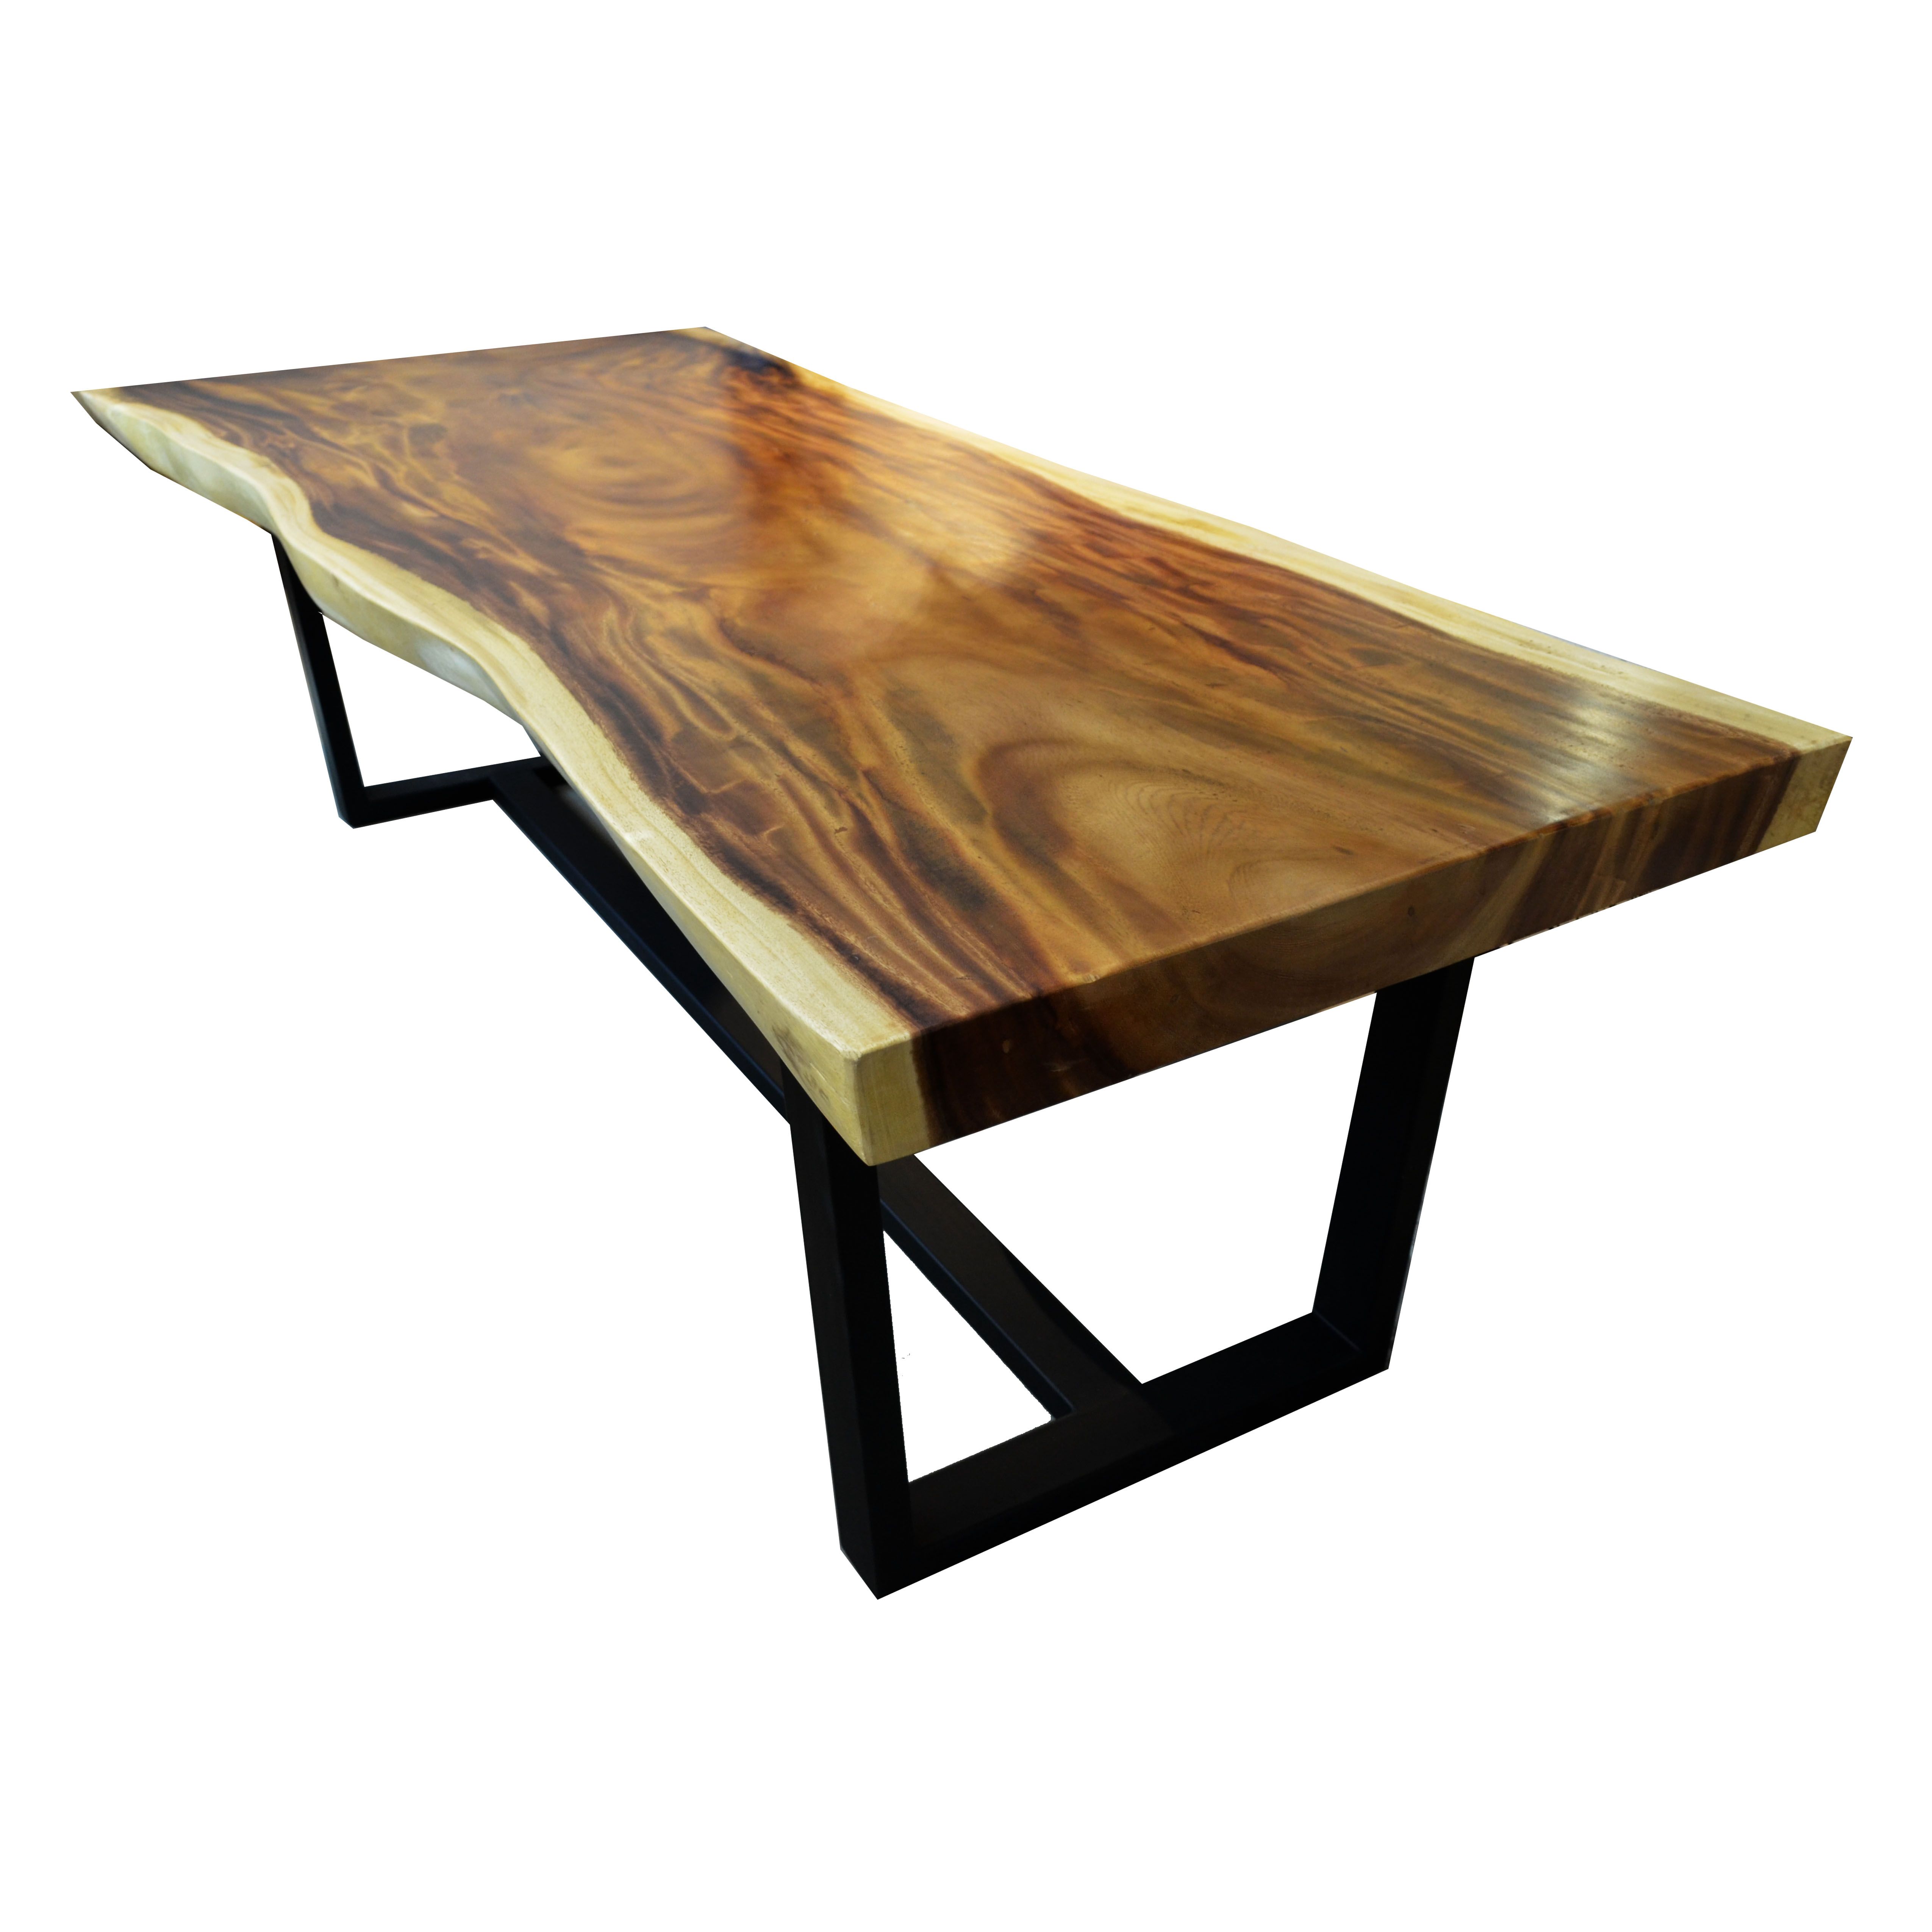 Dining Table - Suar 200x90. The Suar Wood Dining Table reveals a ...